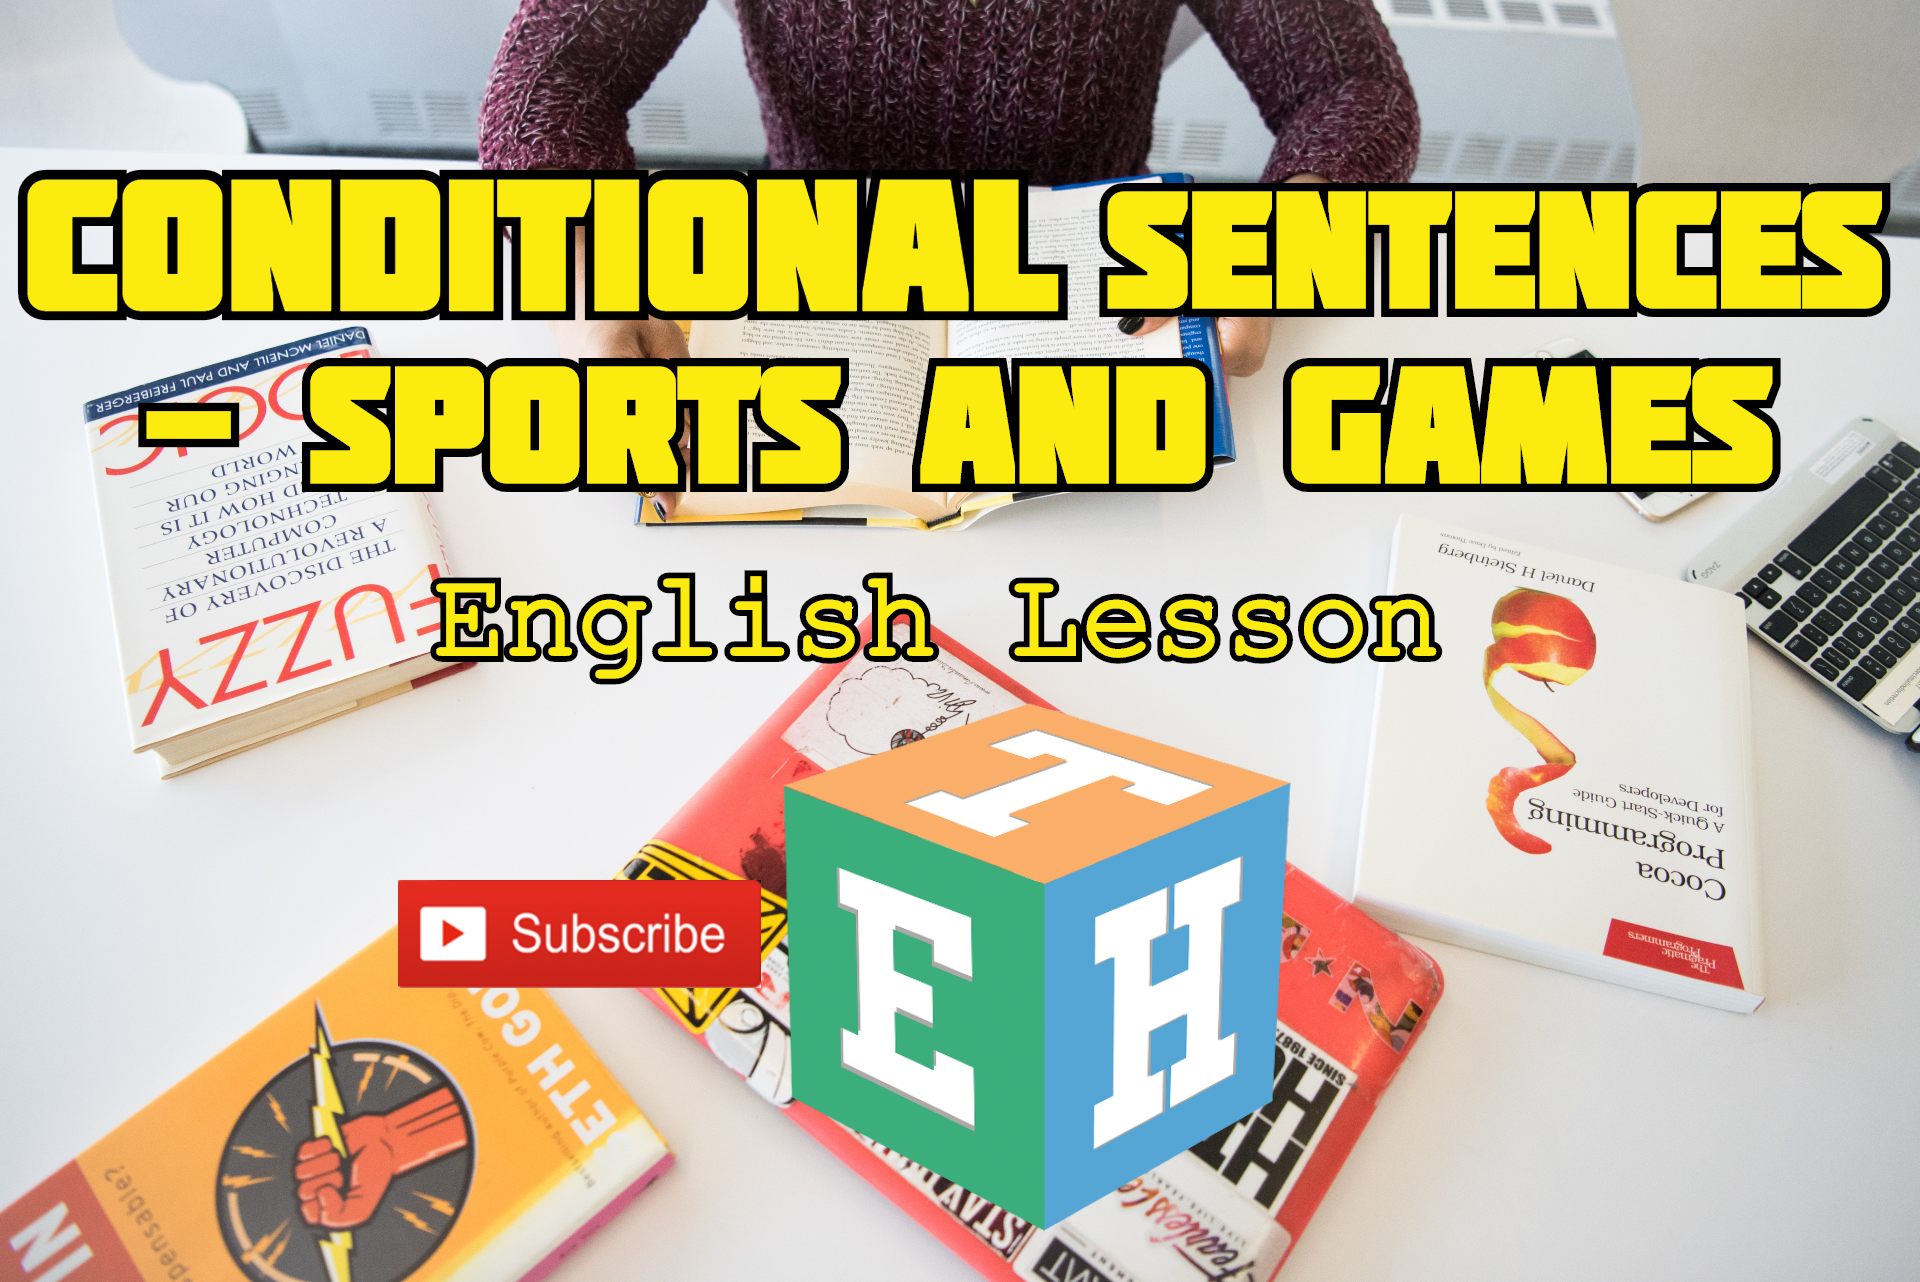 Conditional Sentences - Sports and Games